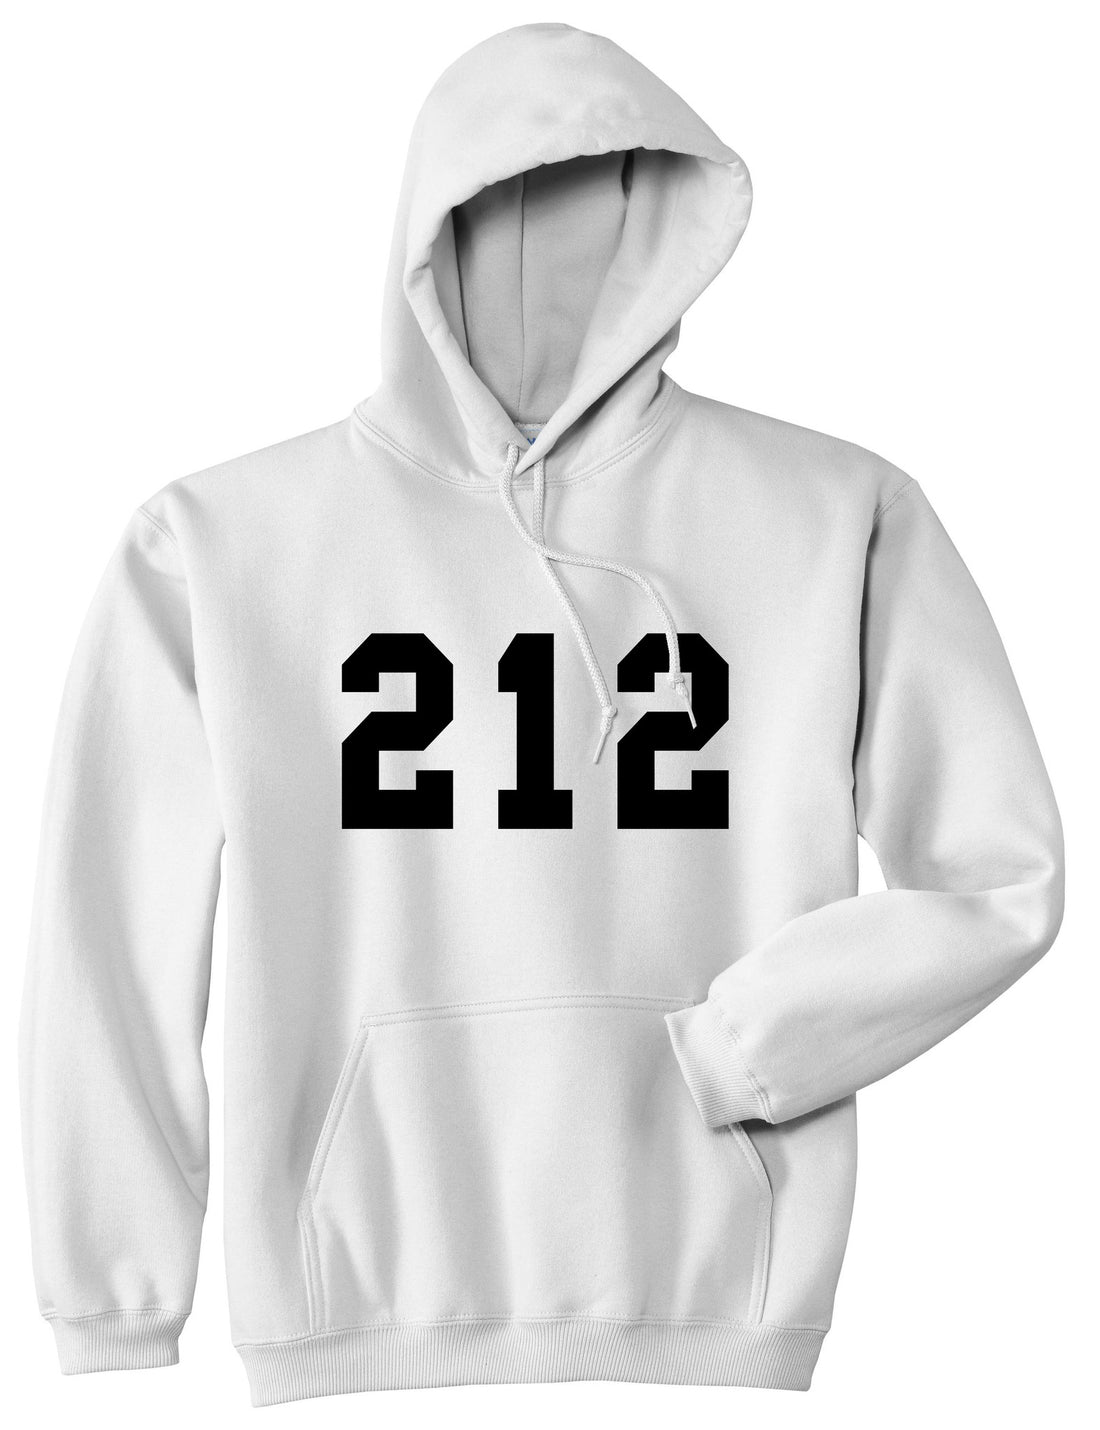 212 New York Area Code Boys Kids Pullover Hoodie Hoody in White By Kings Of NY